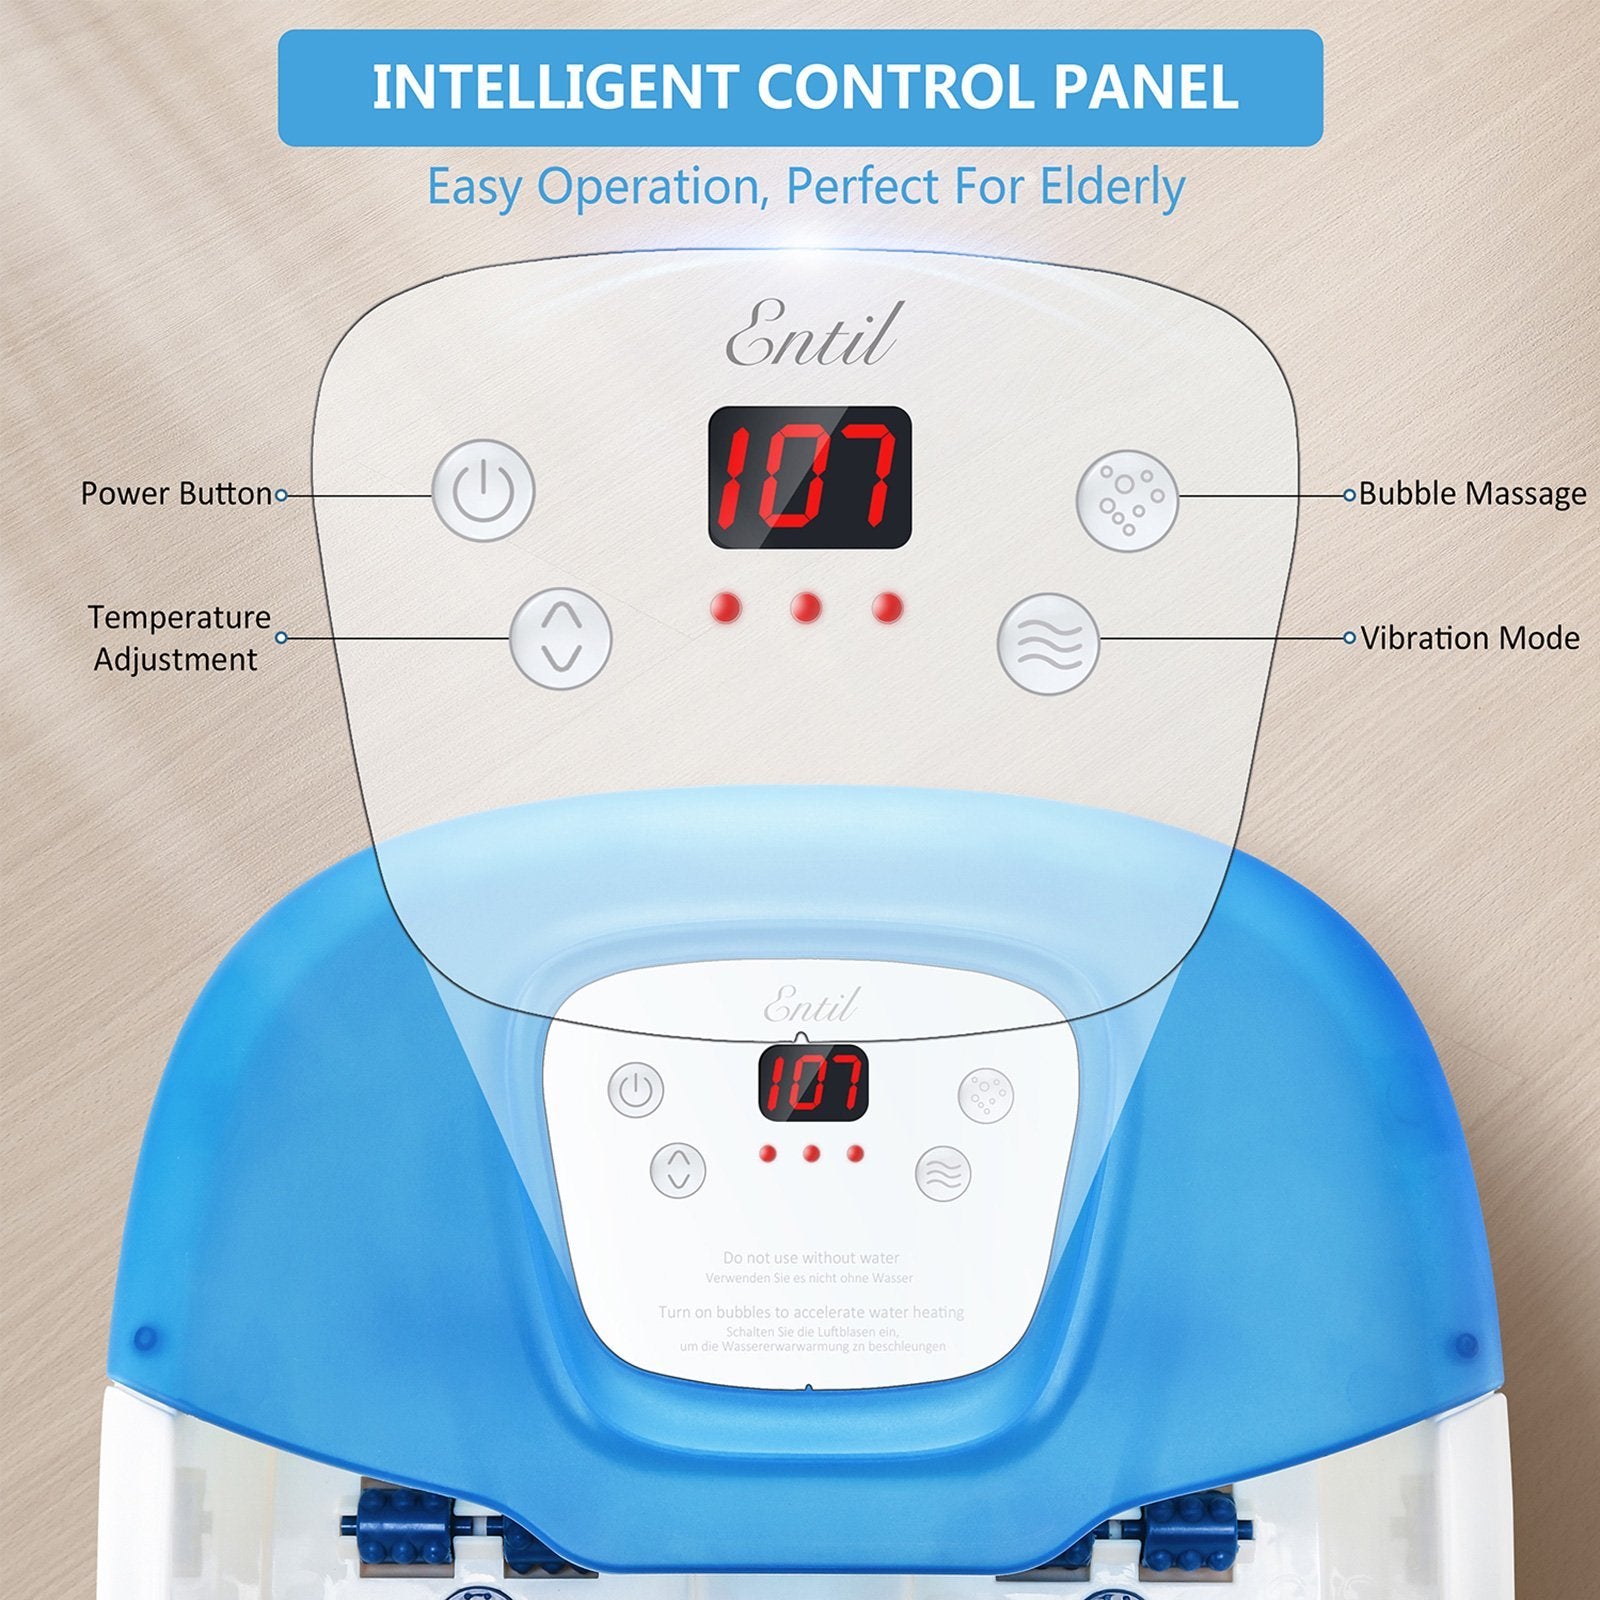 Load image into Gallery viewer, Foot Spa Bath Massager with Heat Bubbles Vibration, Heated Foot Bath Tub with Pedicure Grinding Stone, 16 Massage Rollers, Digital Temperature Control, Home Use - NAIPO
